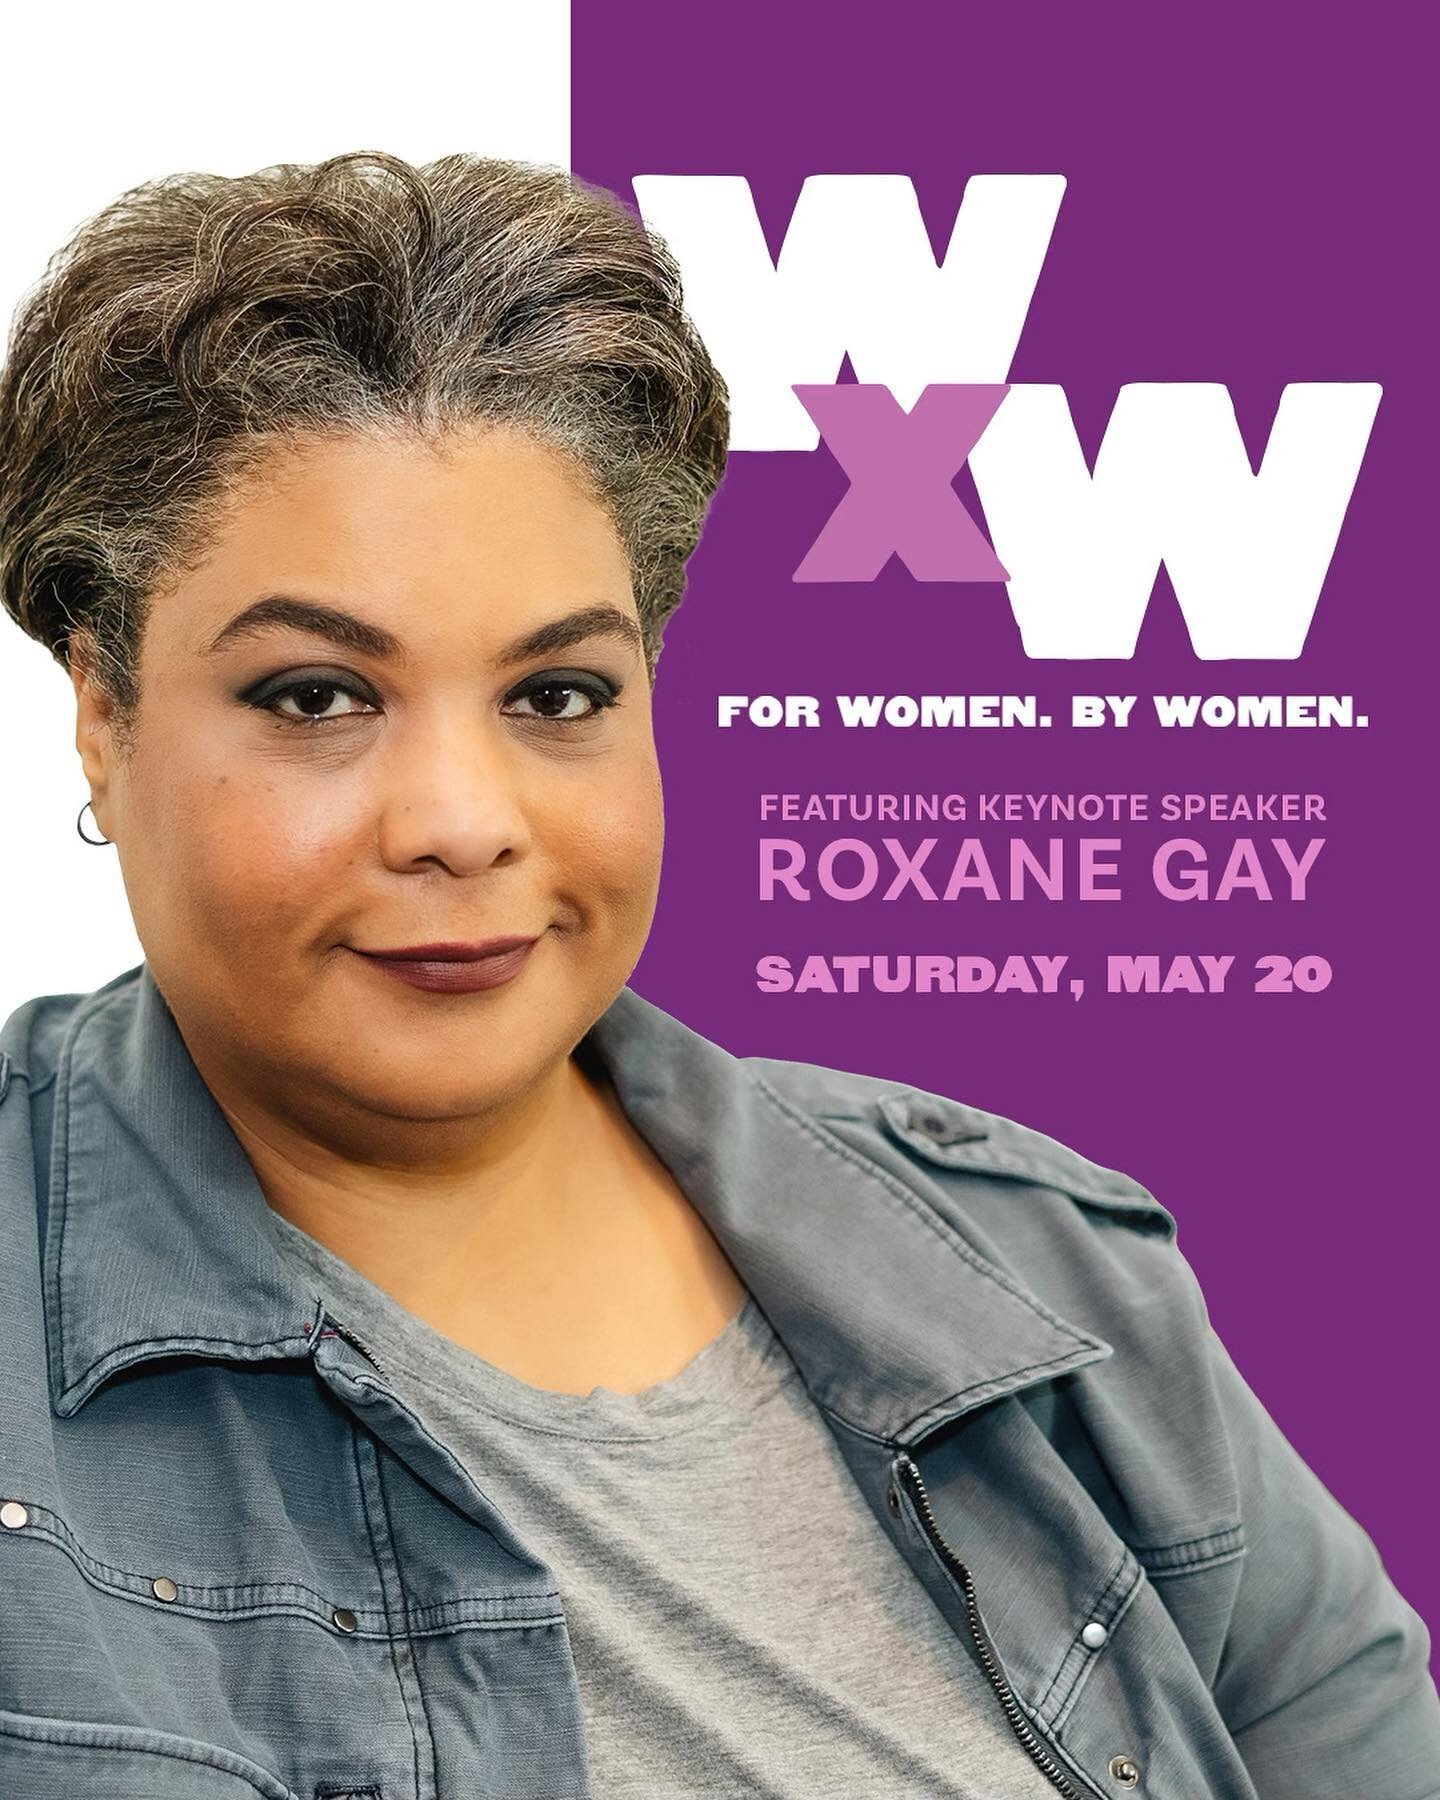 WCW

⚡️Mark your calendars for May 20th! ⚡️We&rsquo;ll be at the Los Angeles LGBT Center&rsquo;s awesome event #WxW: For Women. By Women. Celebrate community and wellness at the annual expo for LBTQ+ women and their allies. 🌈🌈
Featuring a keynote a